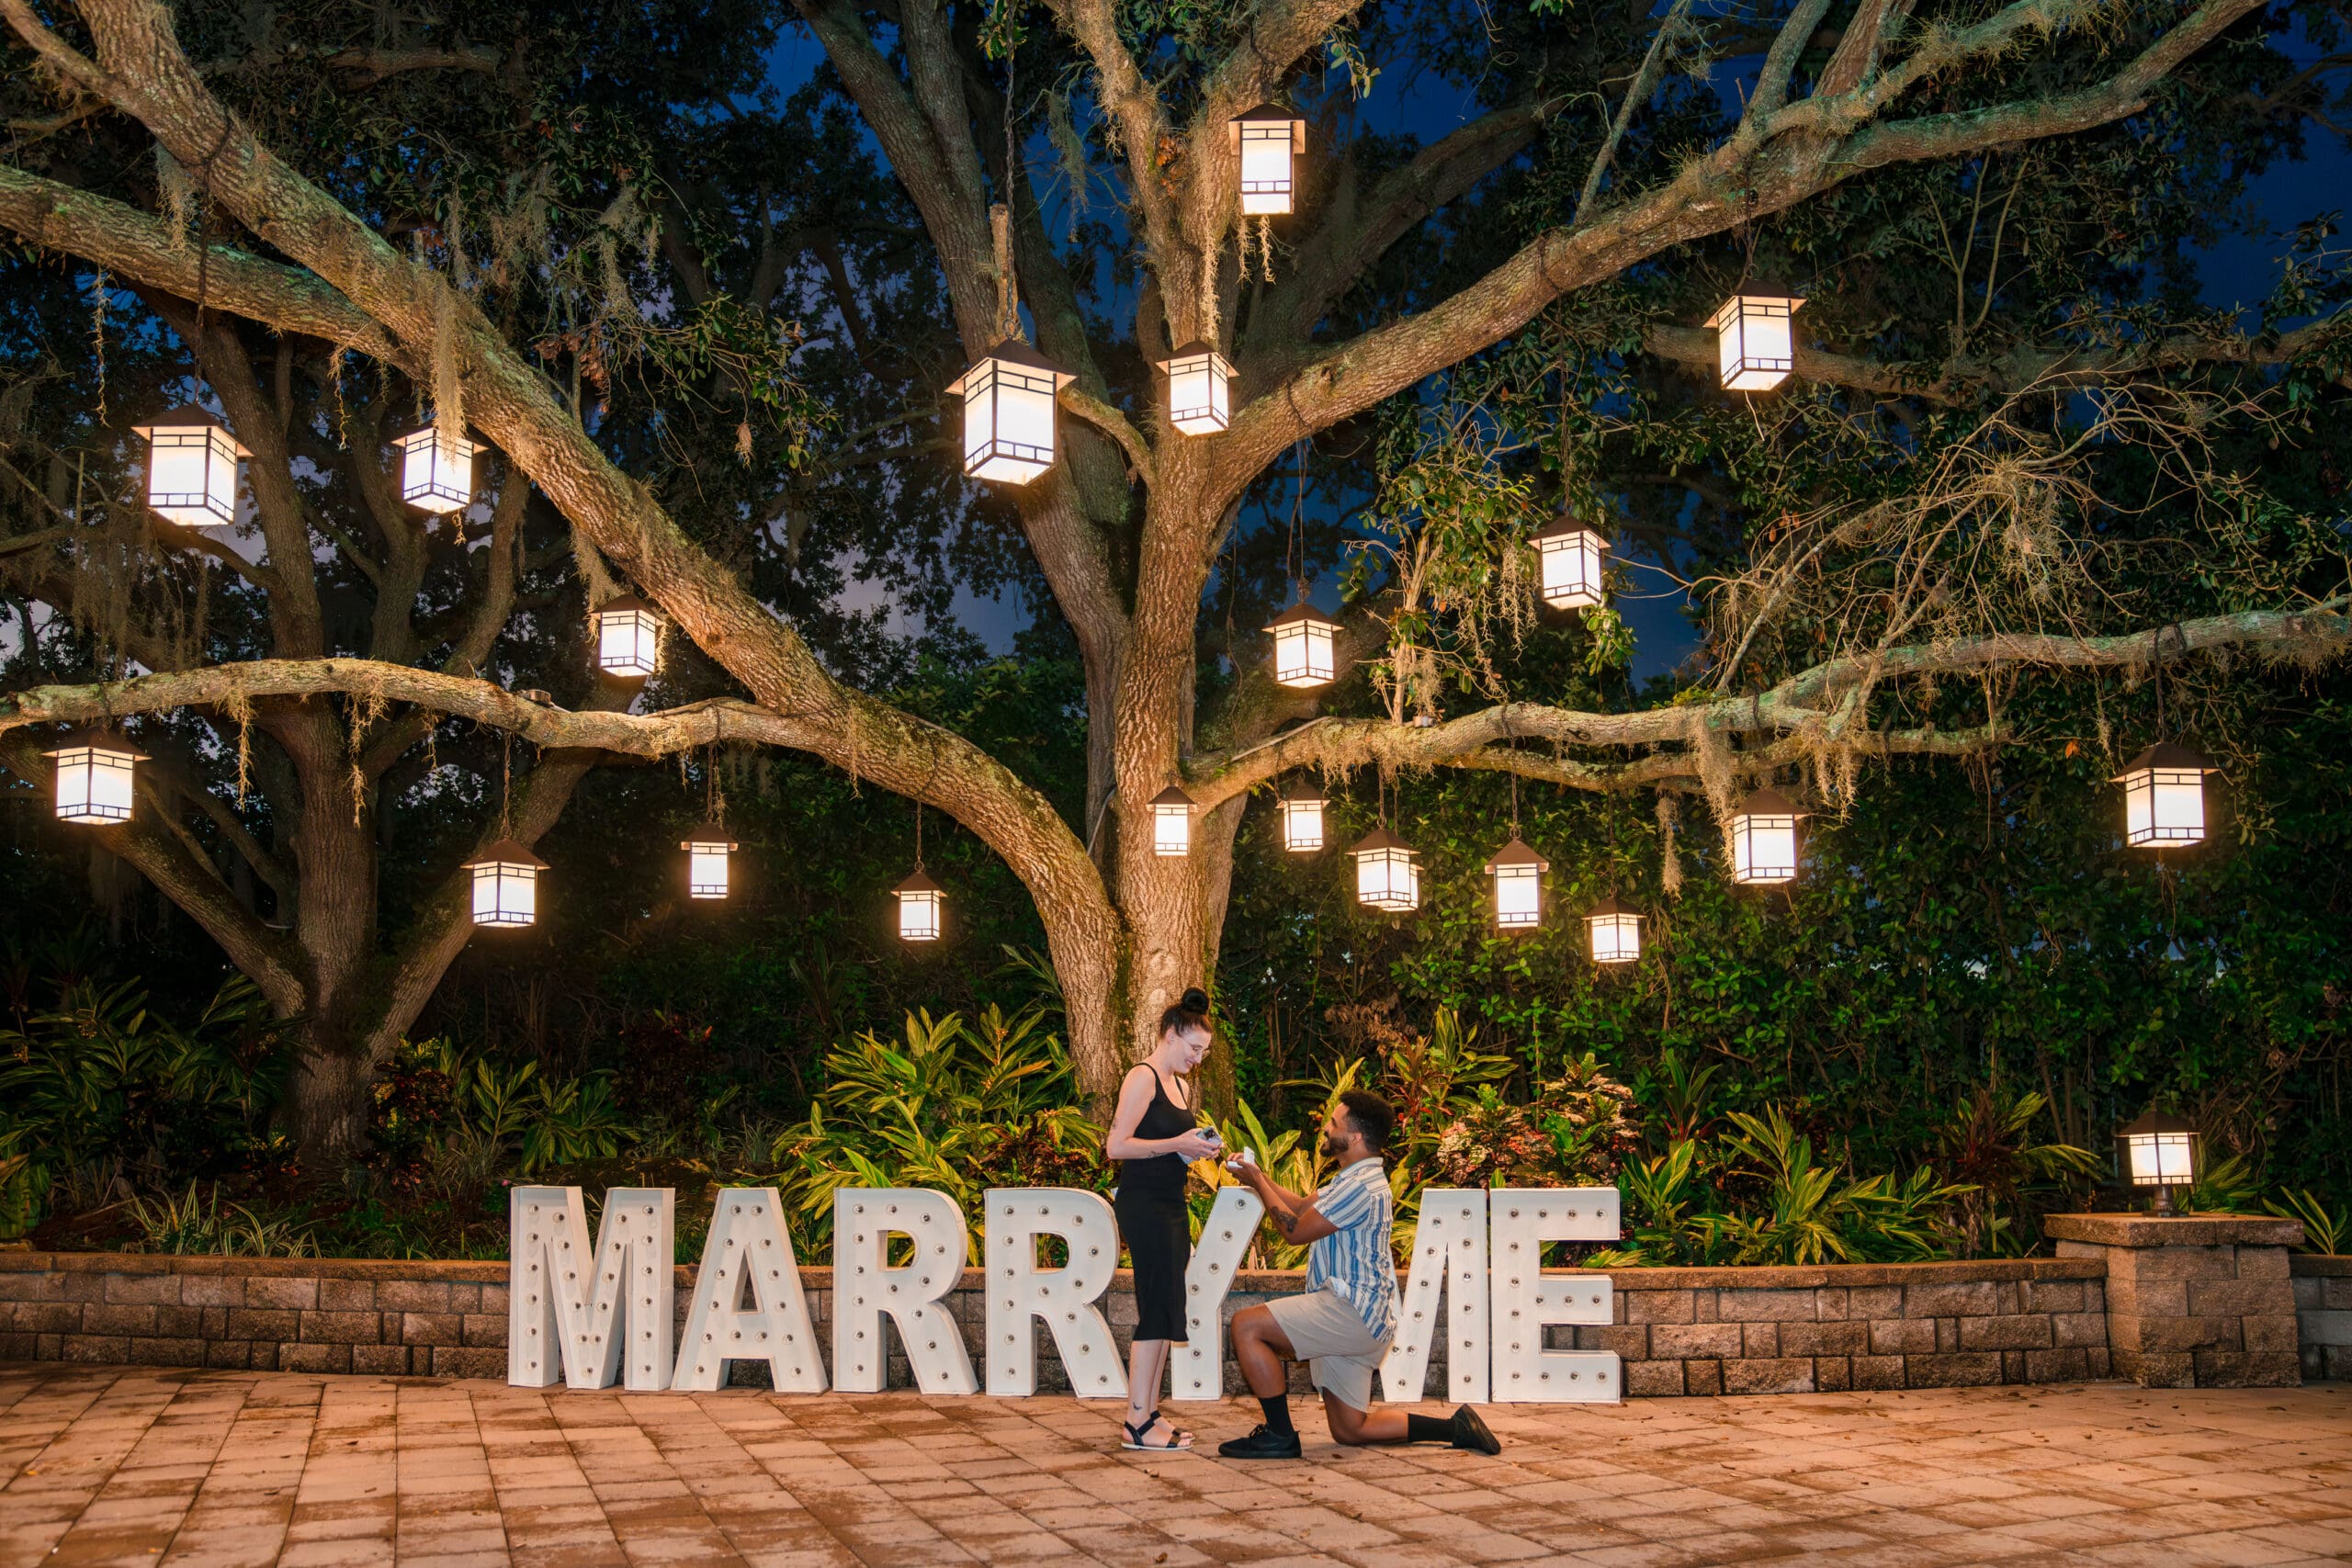 A proposal photo capturing the moment as she says 'YES' under a tree with candle lamps hanging and 'Marry Me' large letters in the background.